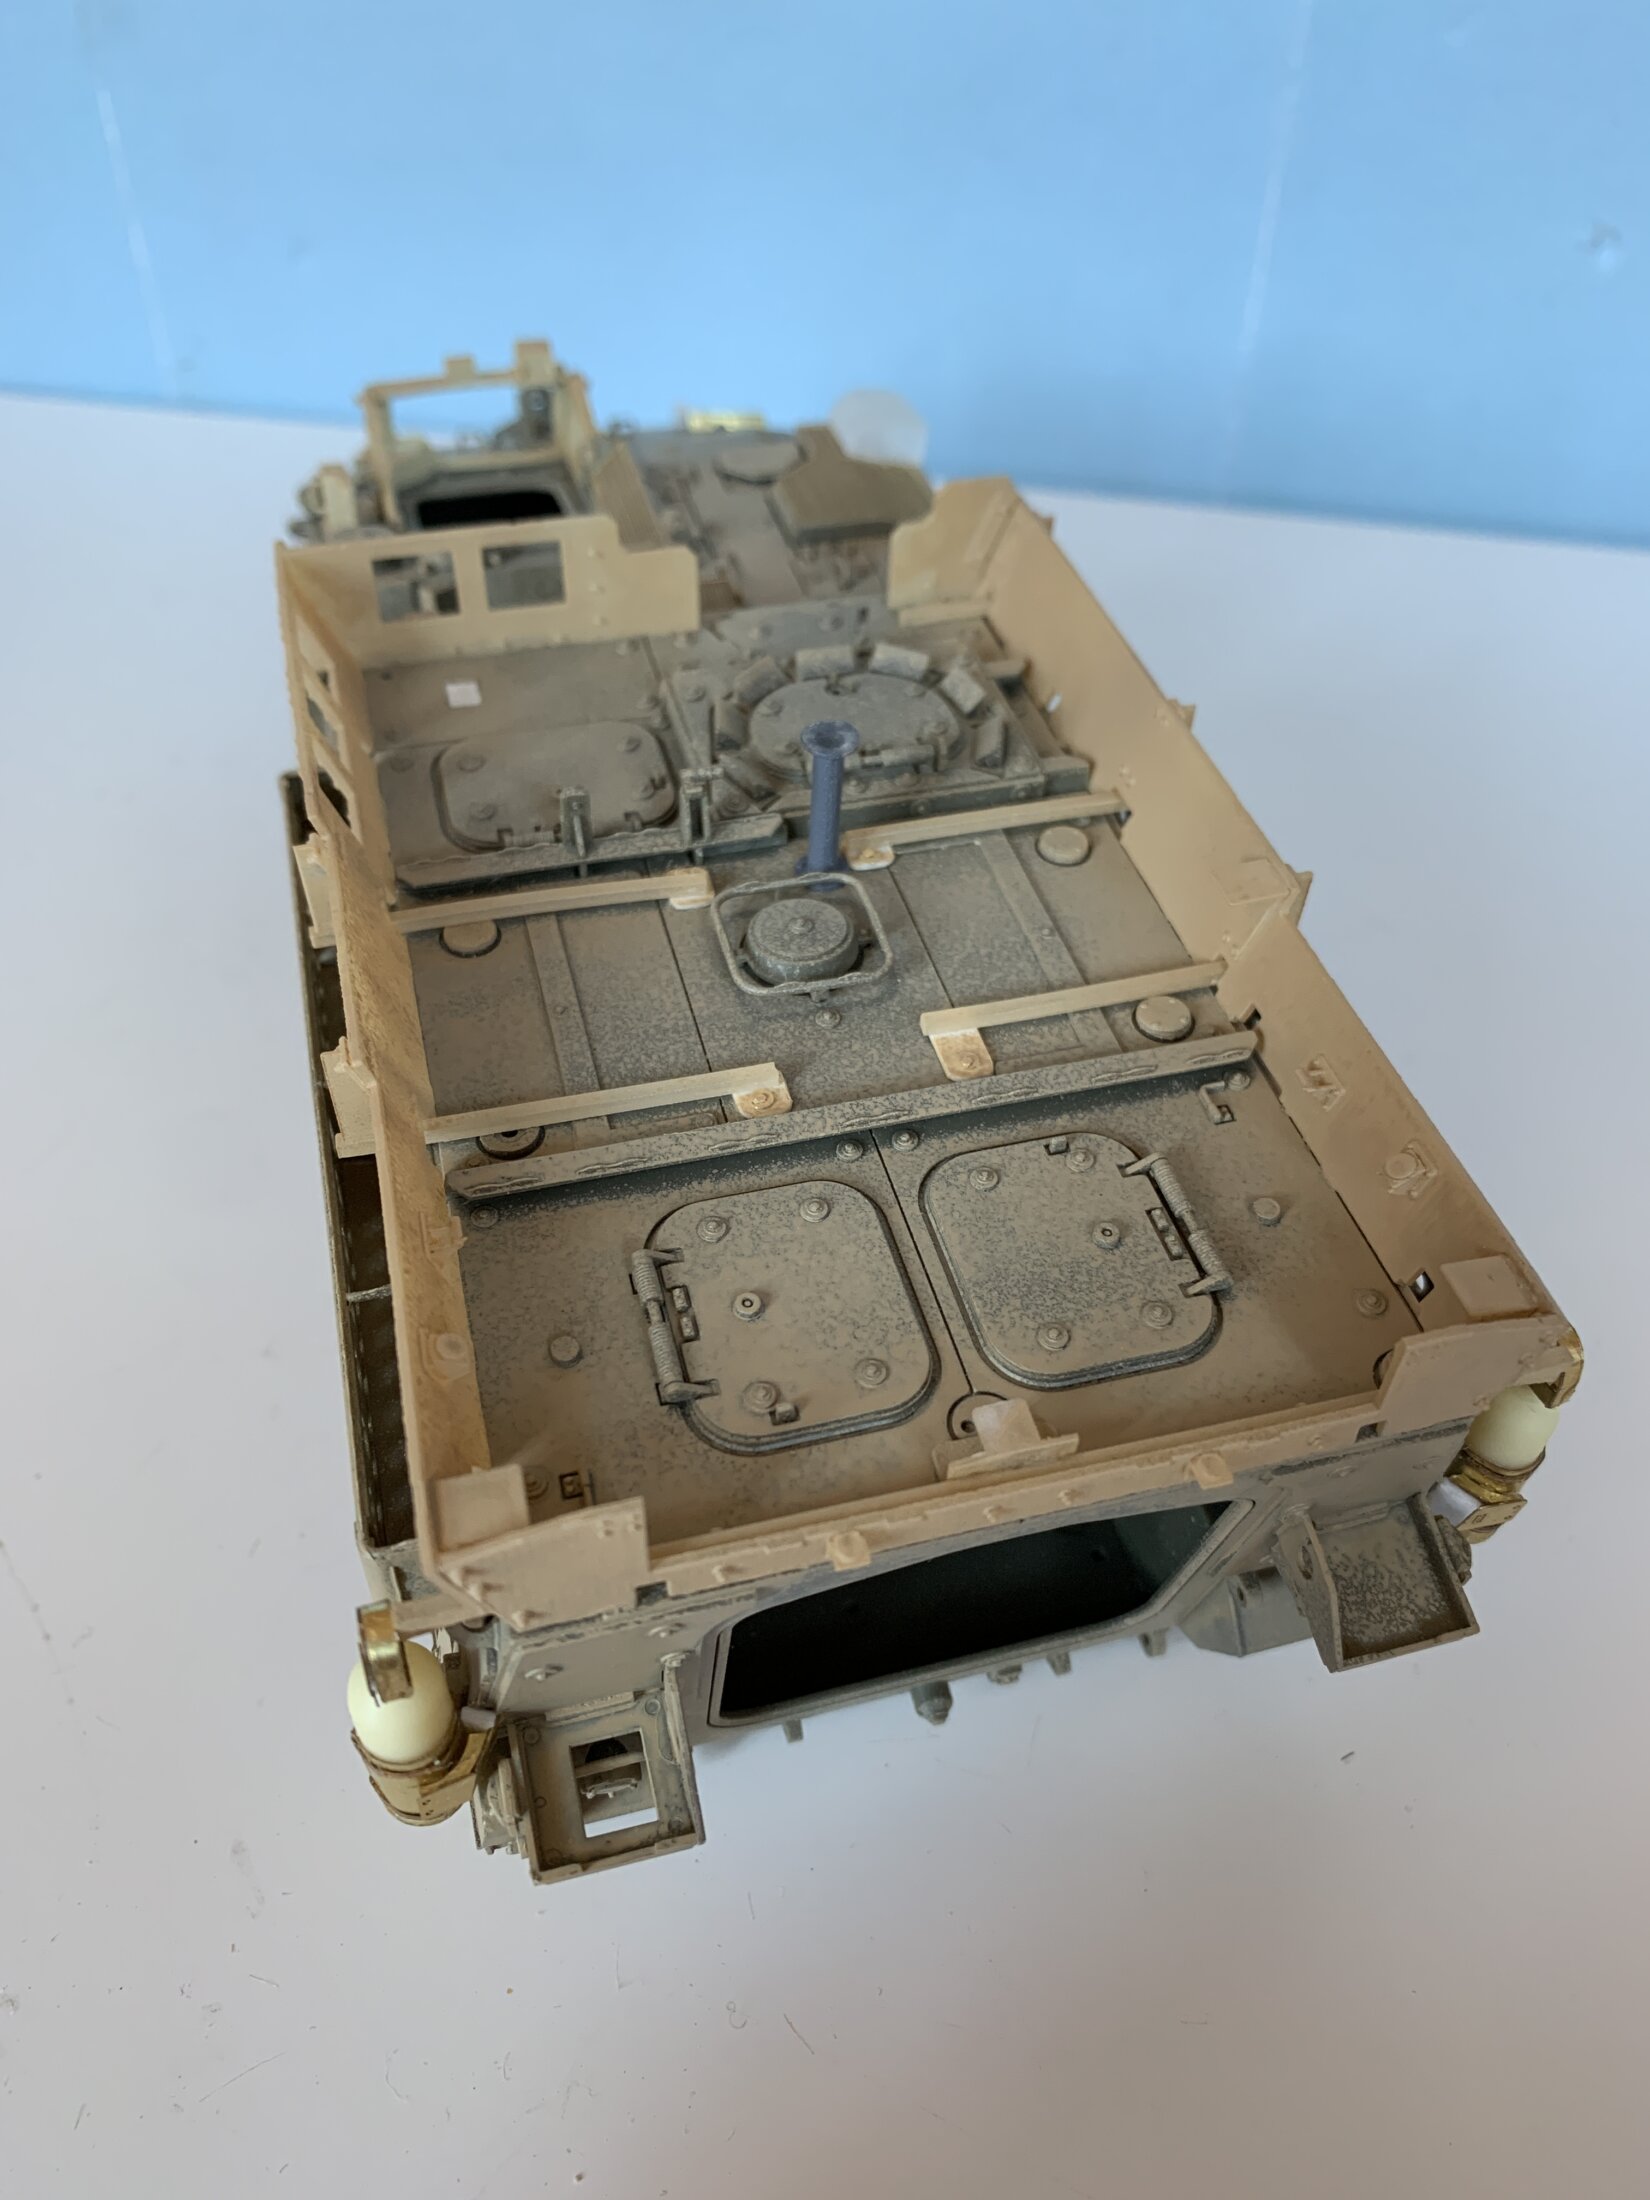 Stryker DVH - US Special Forces - antiblast panels